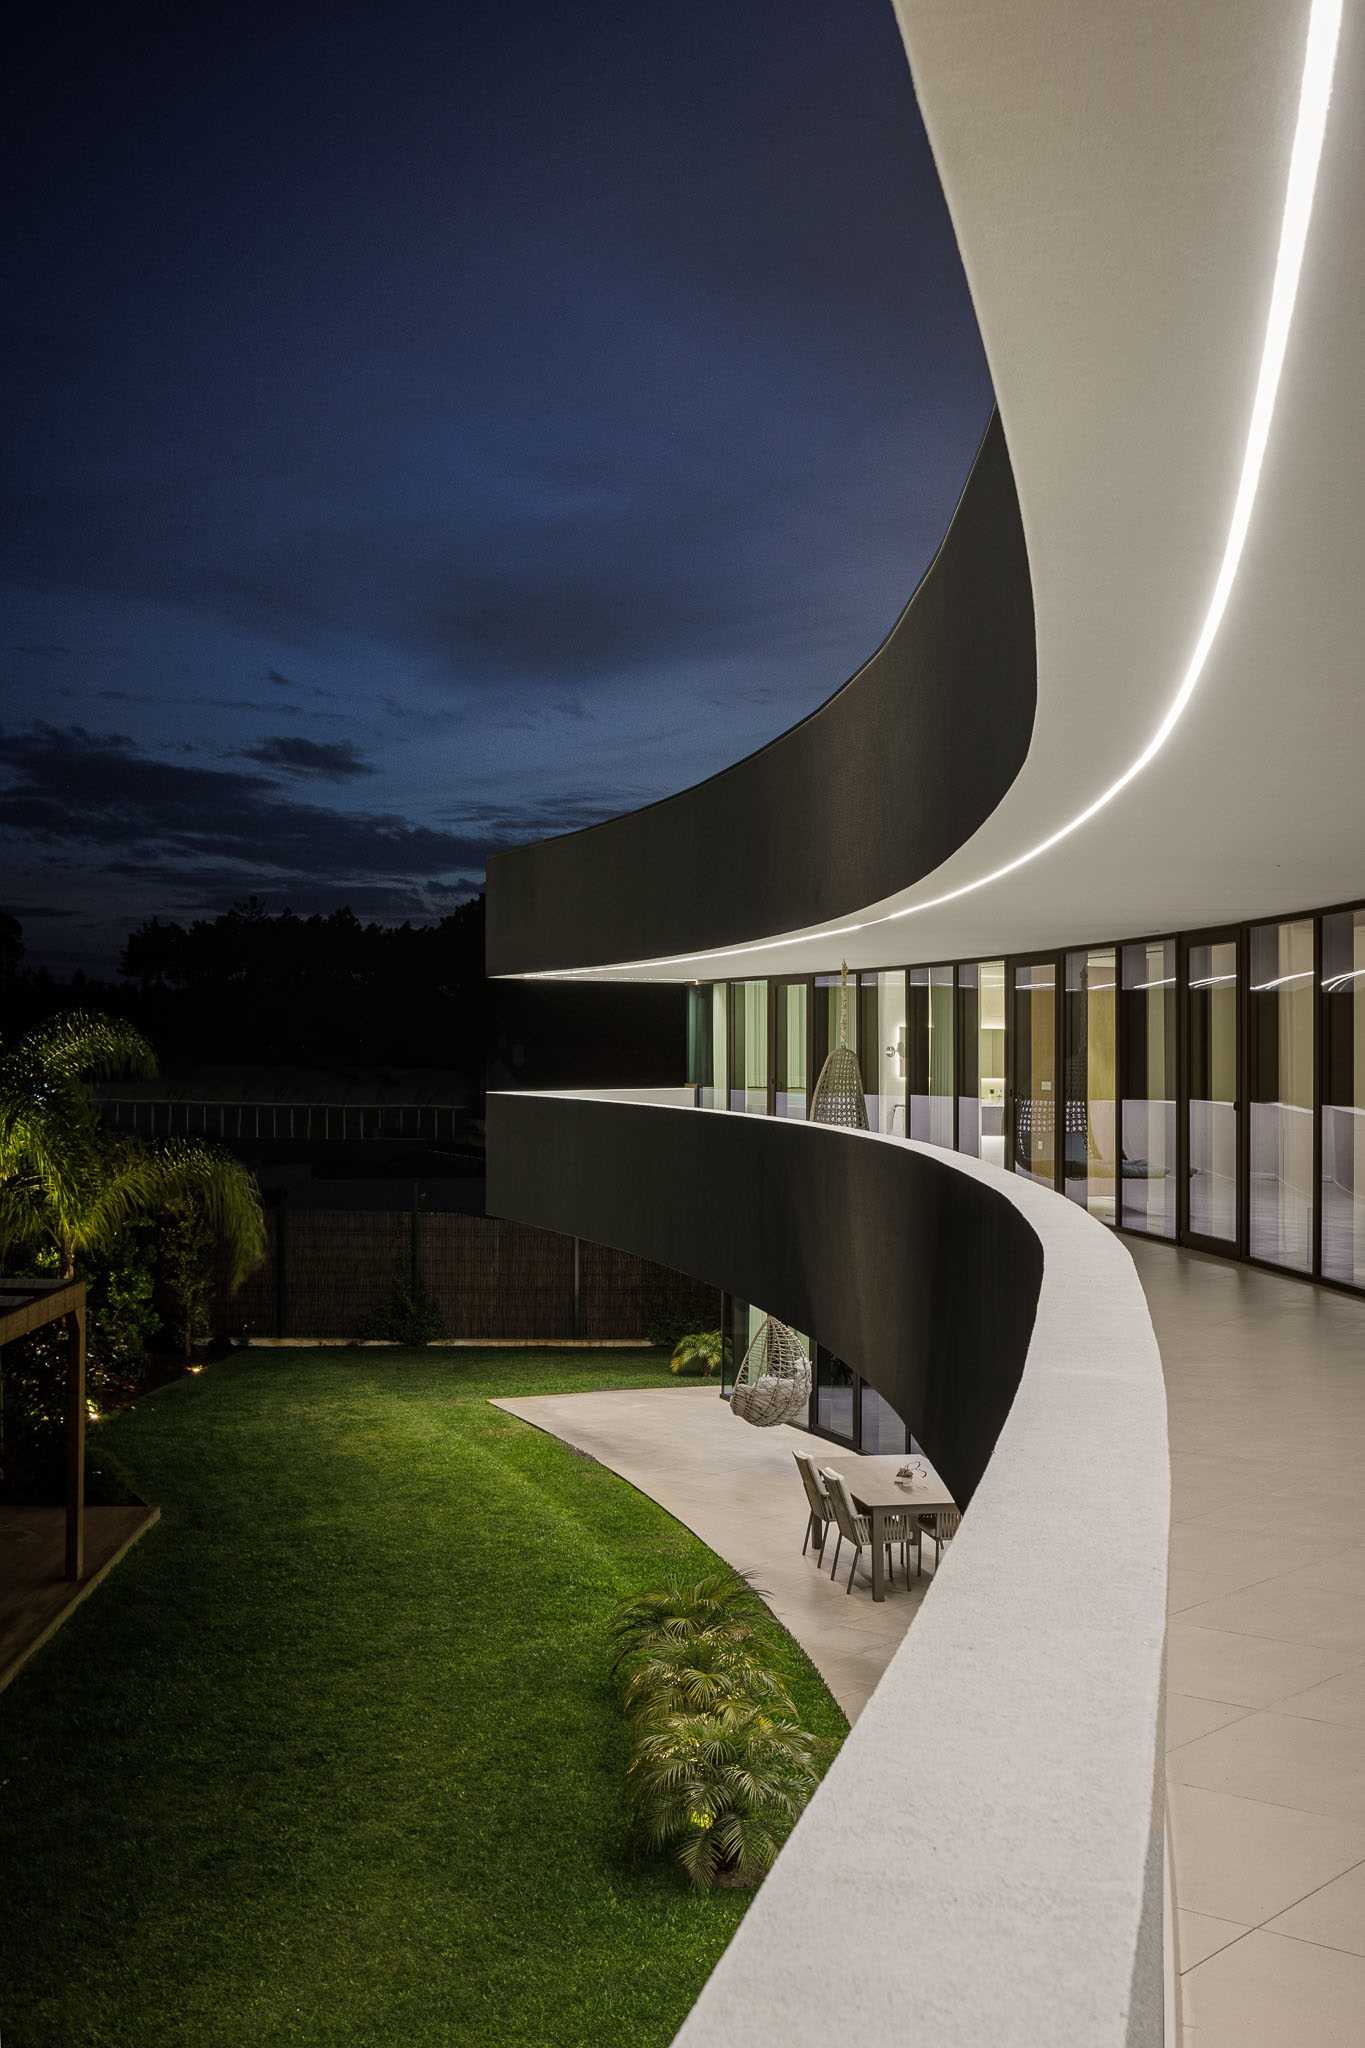 The curved design of this modern home is accentuated by exterior lighting that seamlessly integrates into the architecture.